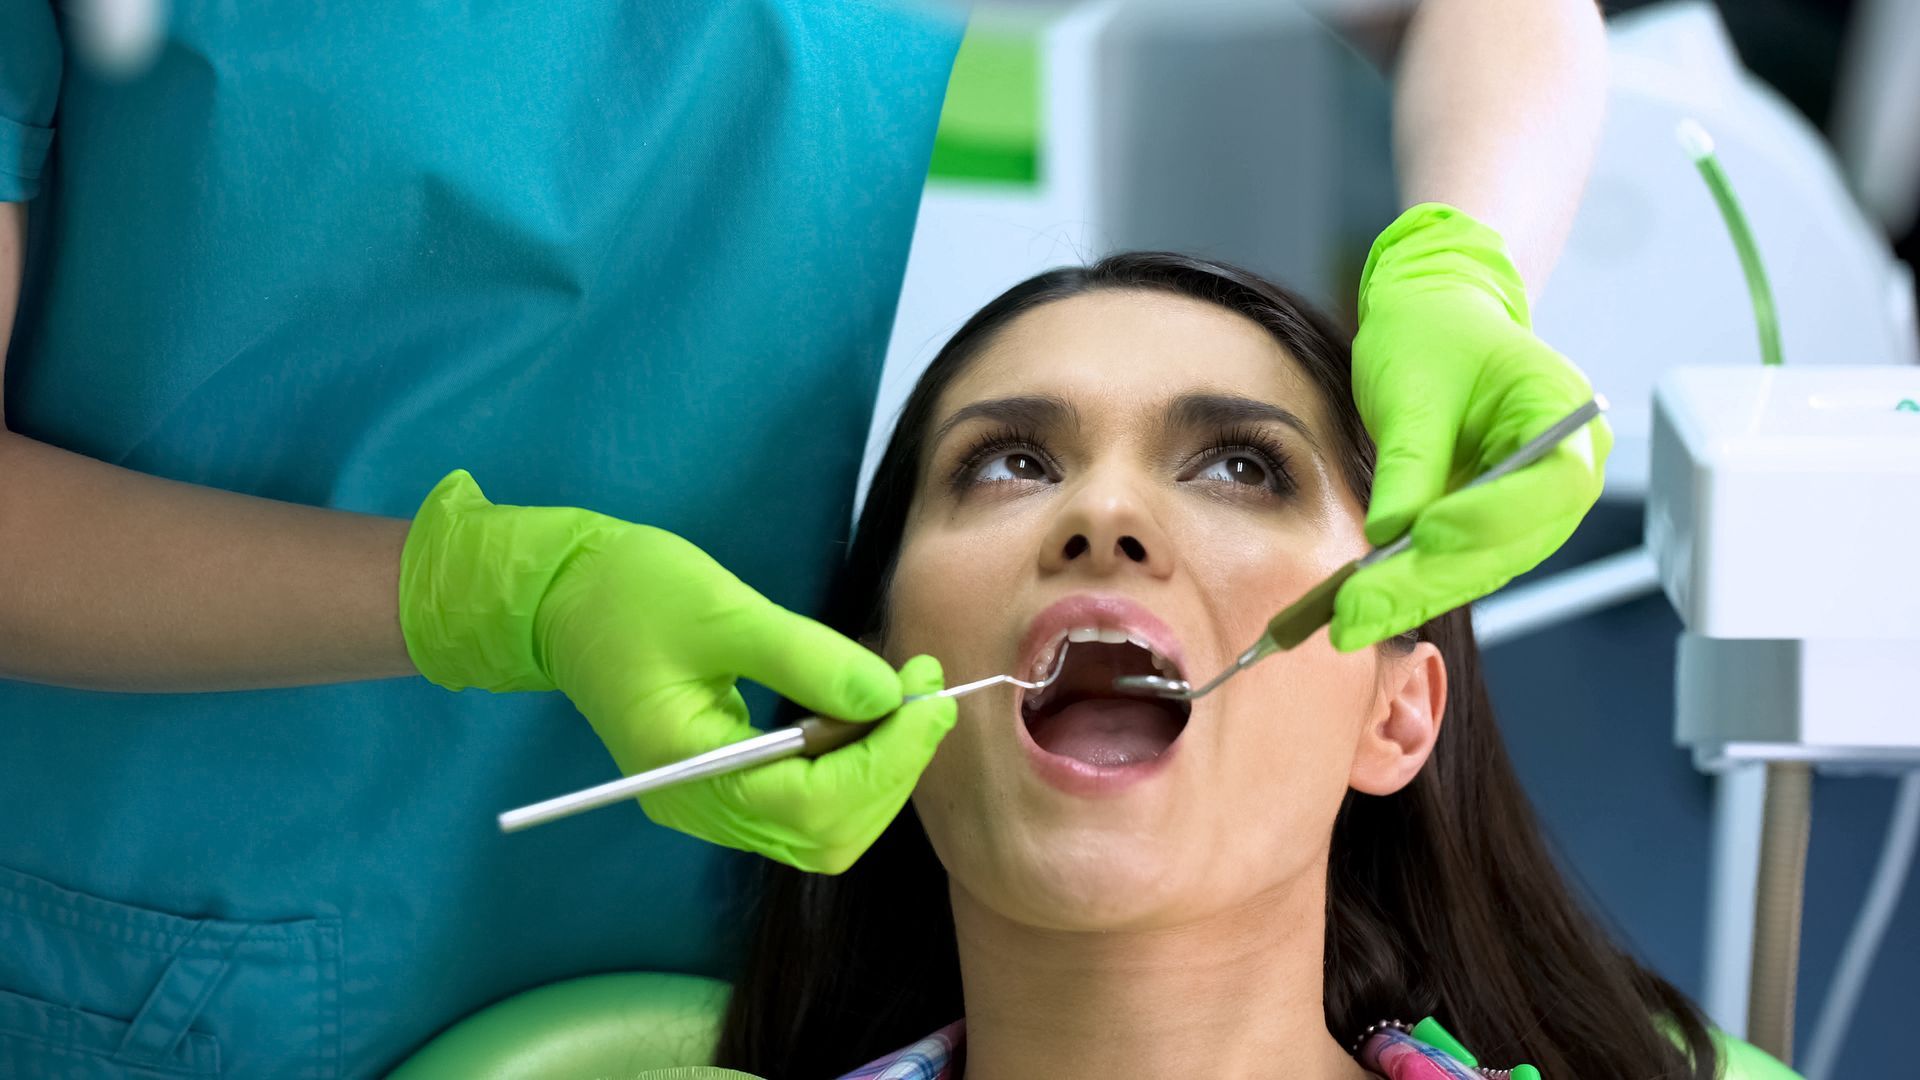 Toothache Troubles? Tips for Relieving Discomfort Before Your Emergency Dental Appointment